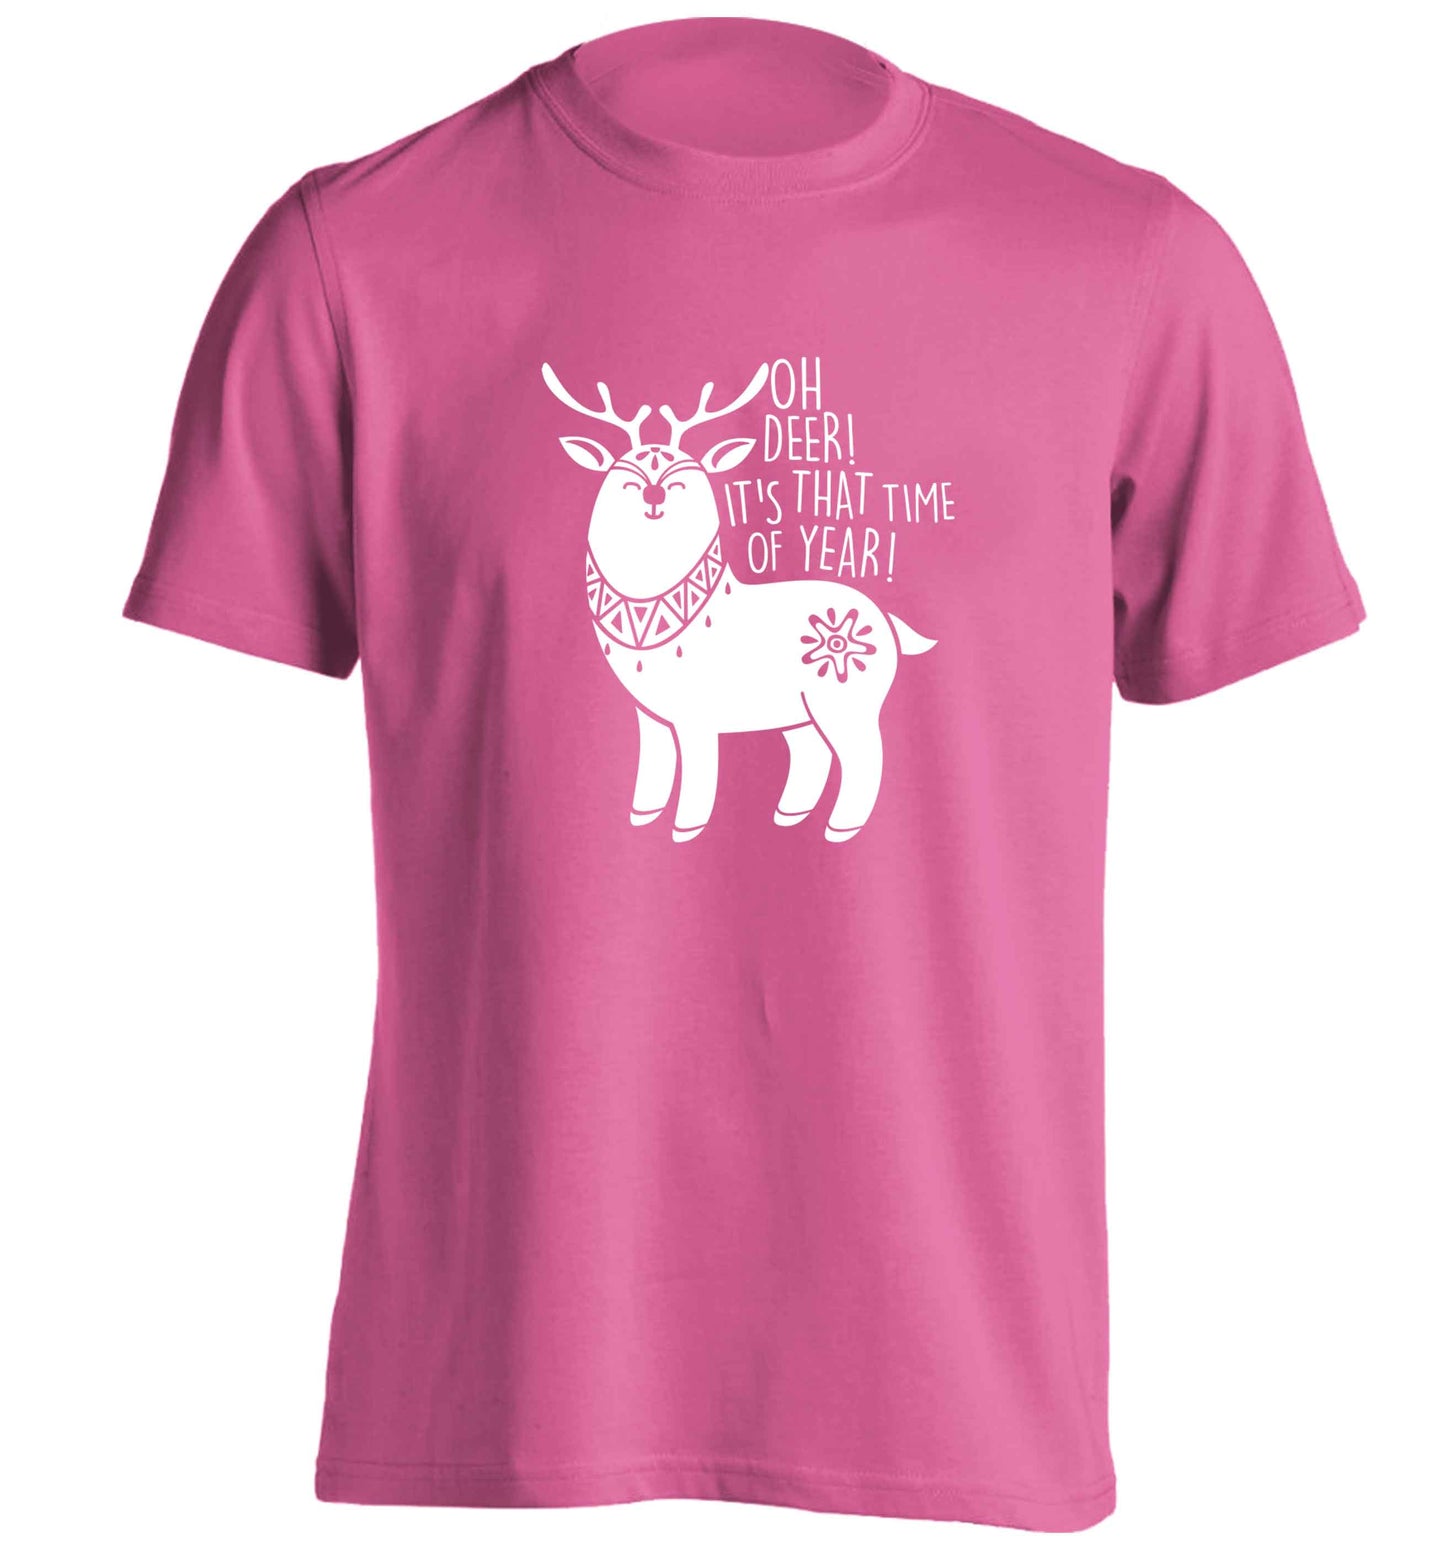 Oh dear it's that time of year adults unisex pink Tshirt 2XL